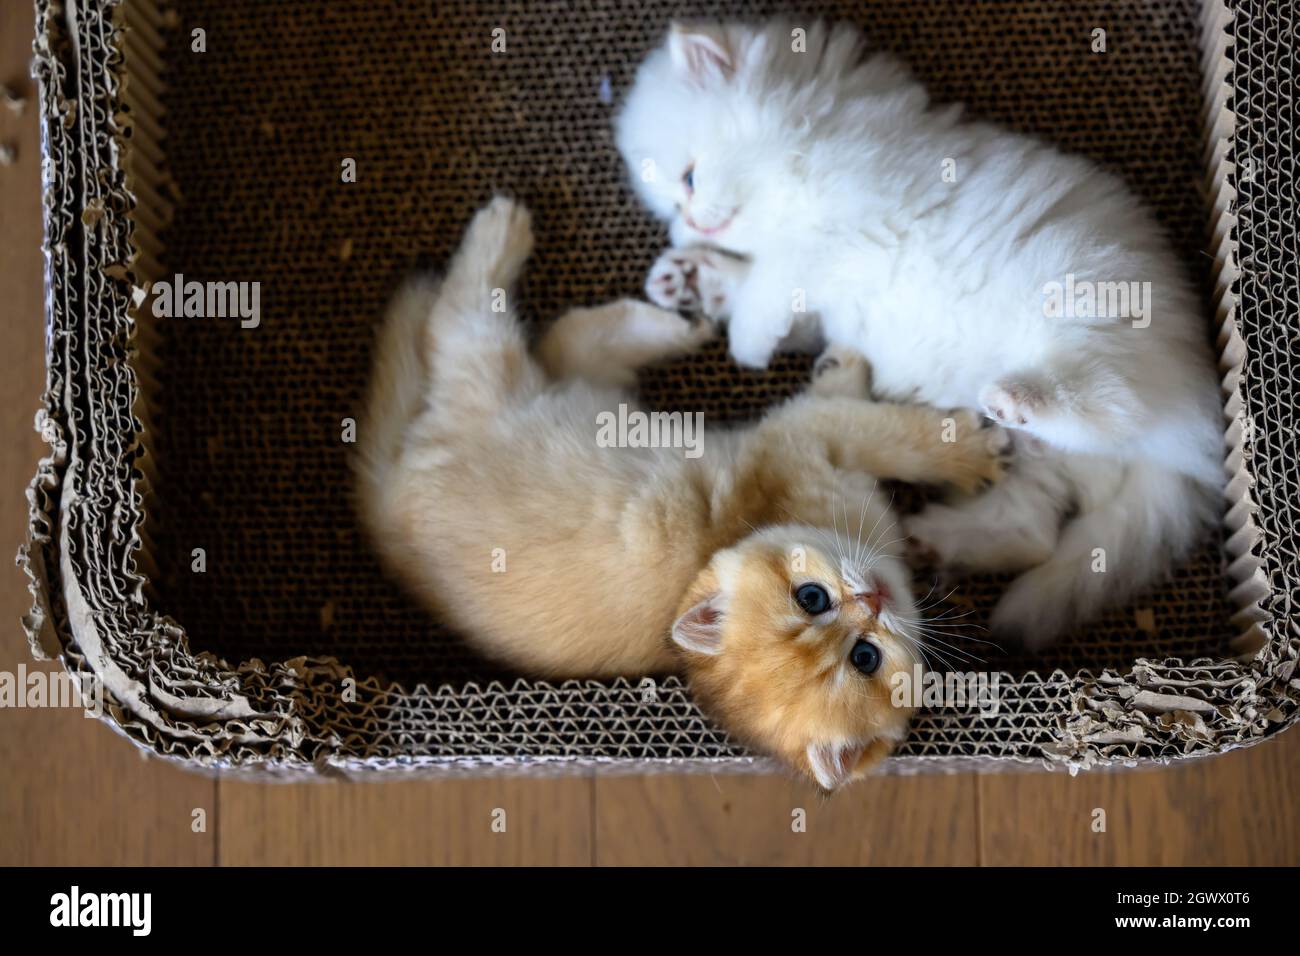 Two British Shorthair kittens playing happily lying in a cardboard box View from above, white and orange cats are naughty and looking up. Stock Photo